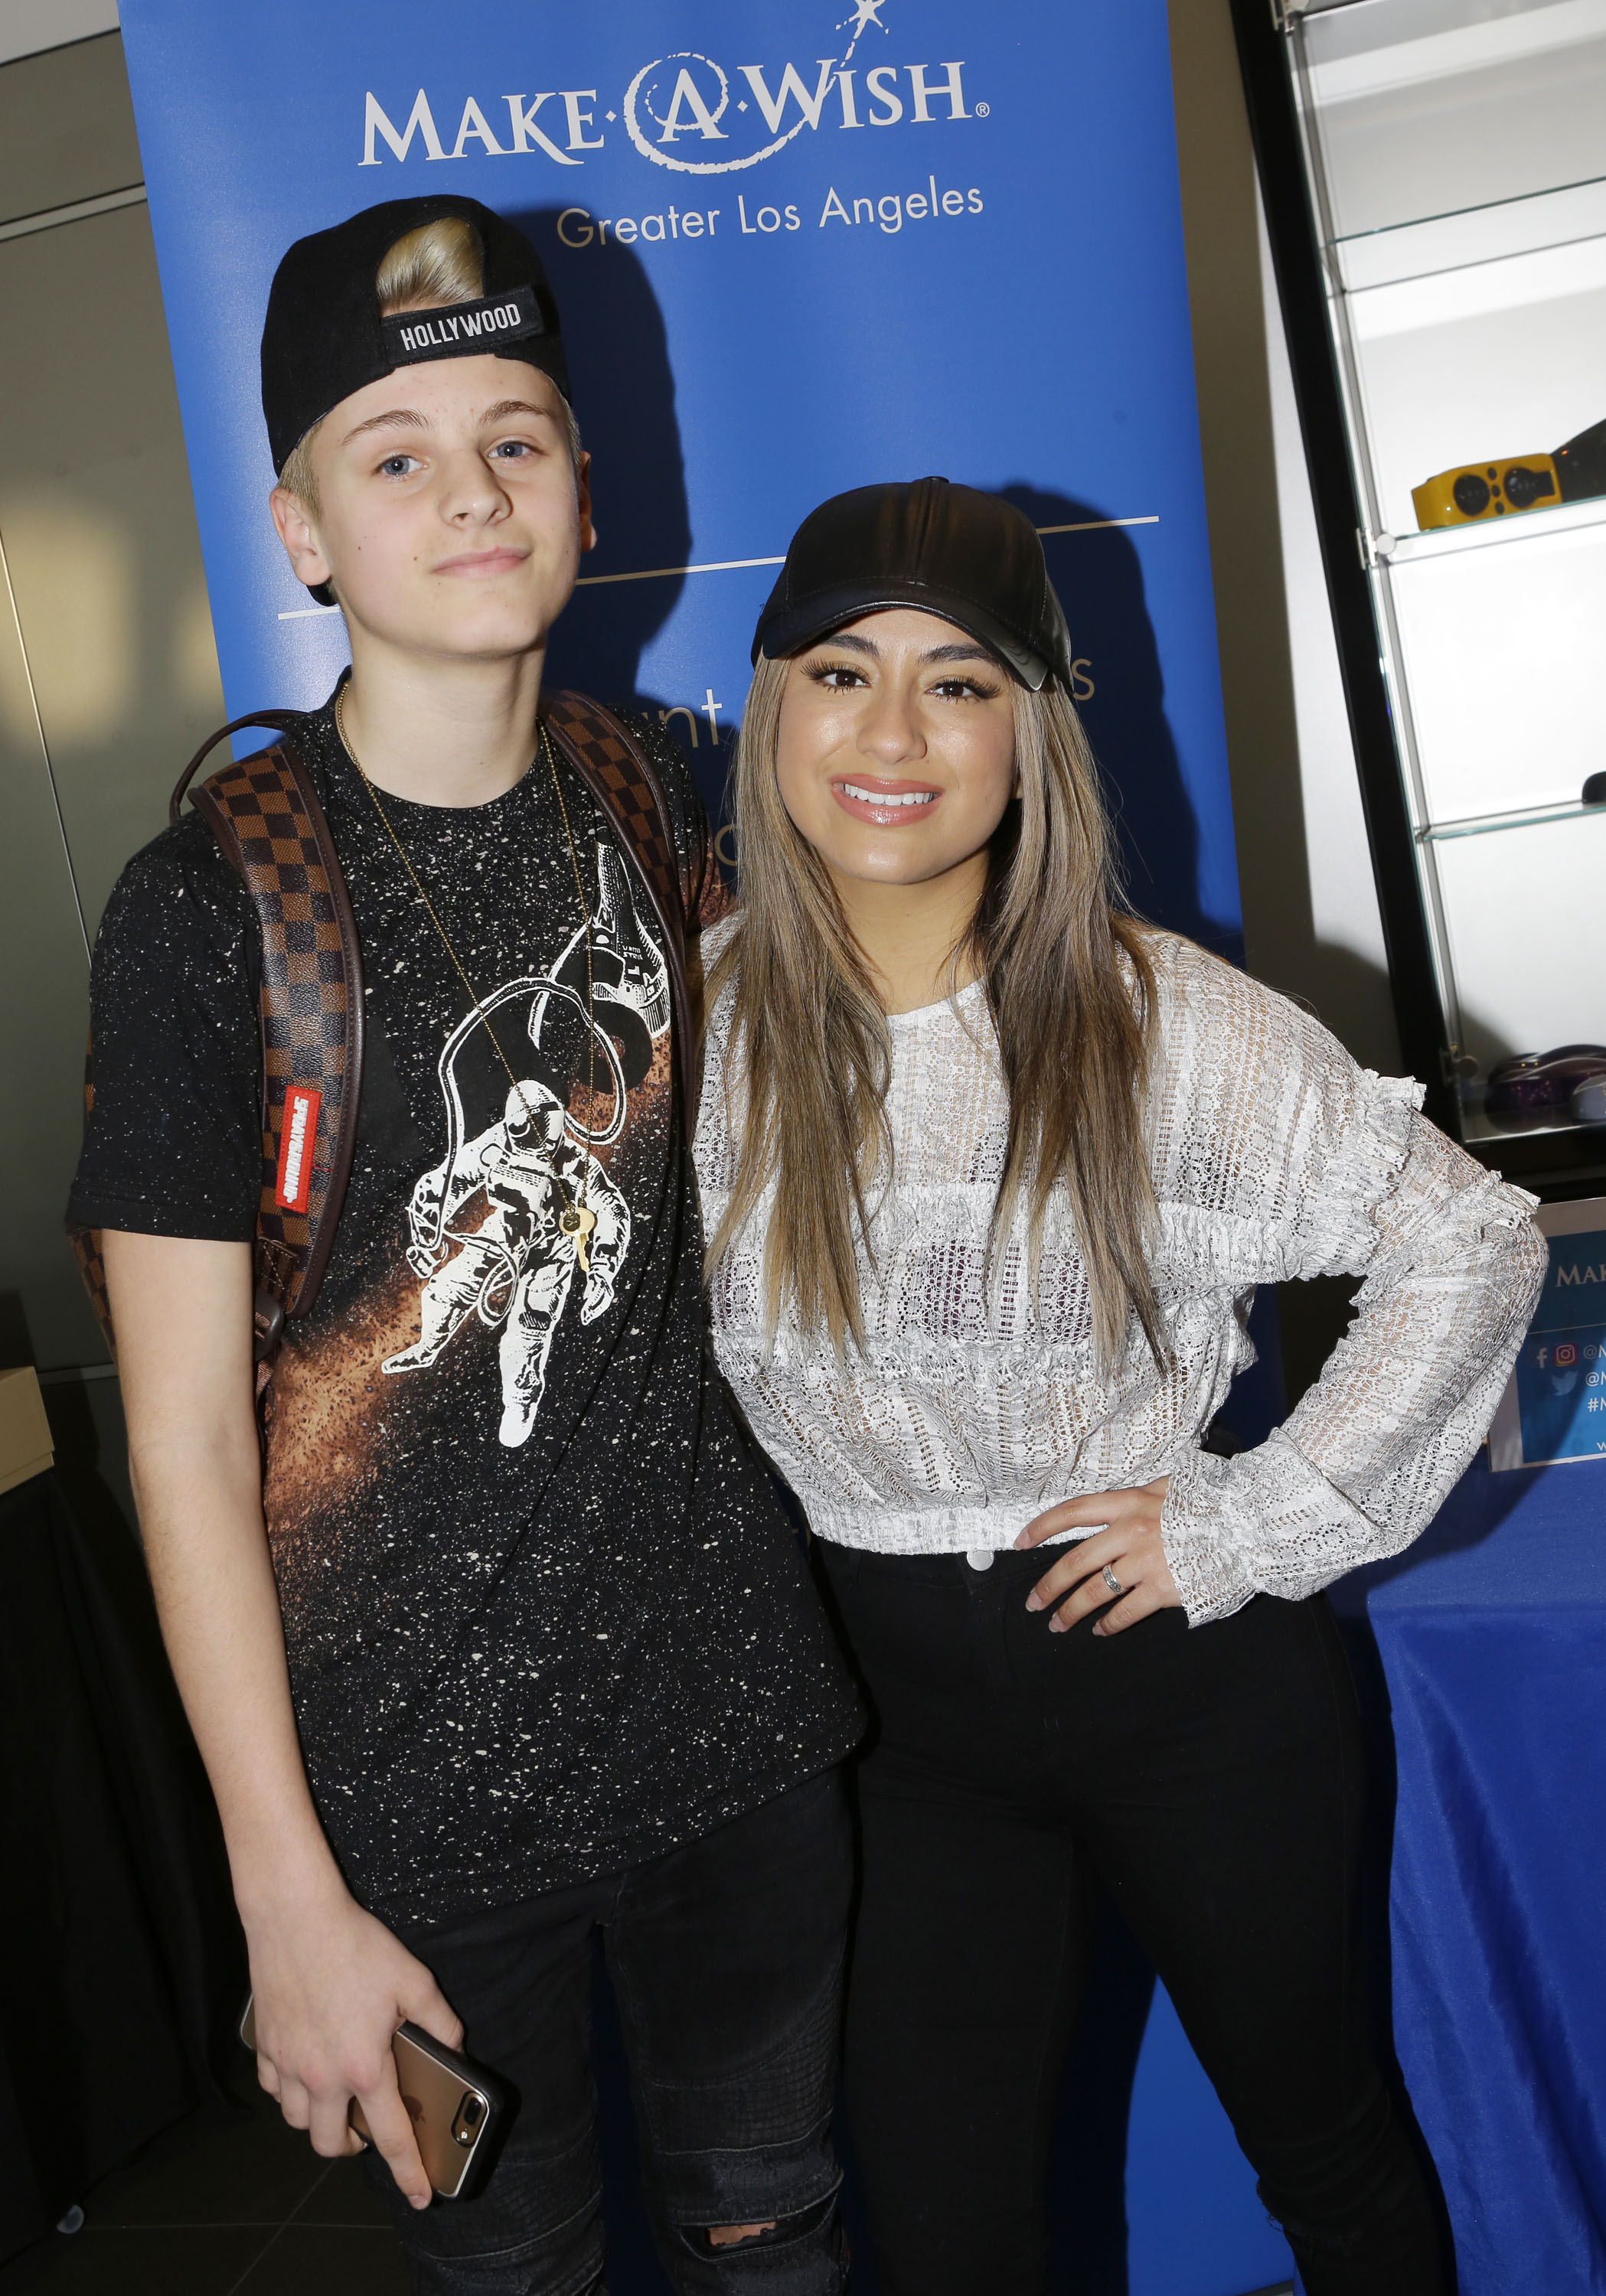  Internet personality Mark Thomas (L) and singer-songwriter Ally Brooke (Photo by Tiffany Rose/Getty Images for GBK)